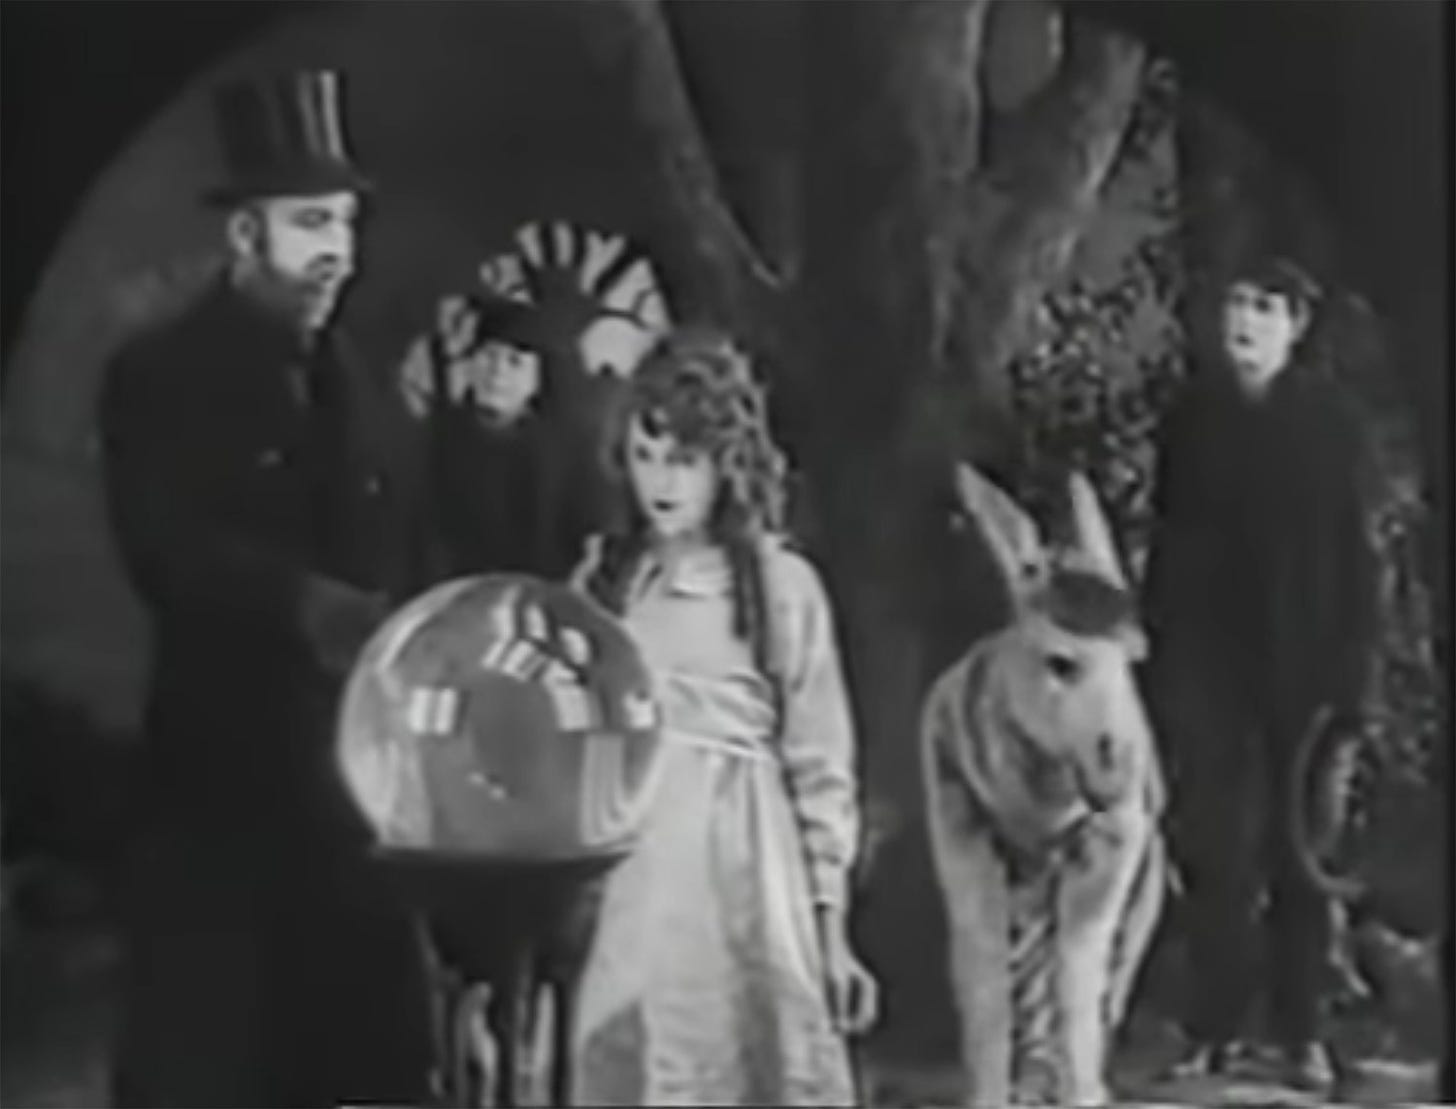 Still from 1917 fairy tale film The Poor Little Rich Girl. May Pickford, playing a child, a tall man in a top hat, a crystal ball, a person dressed as a donkey